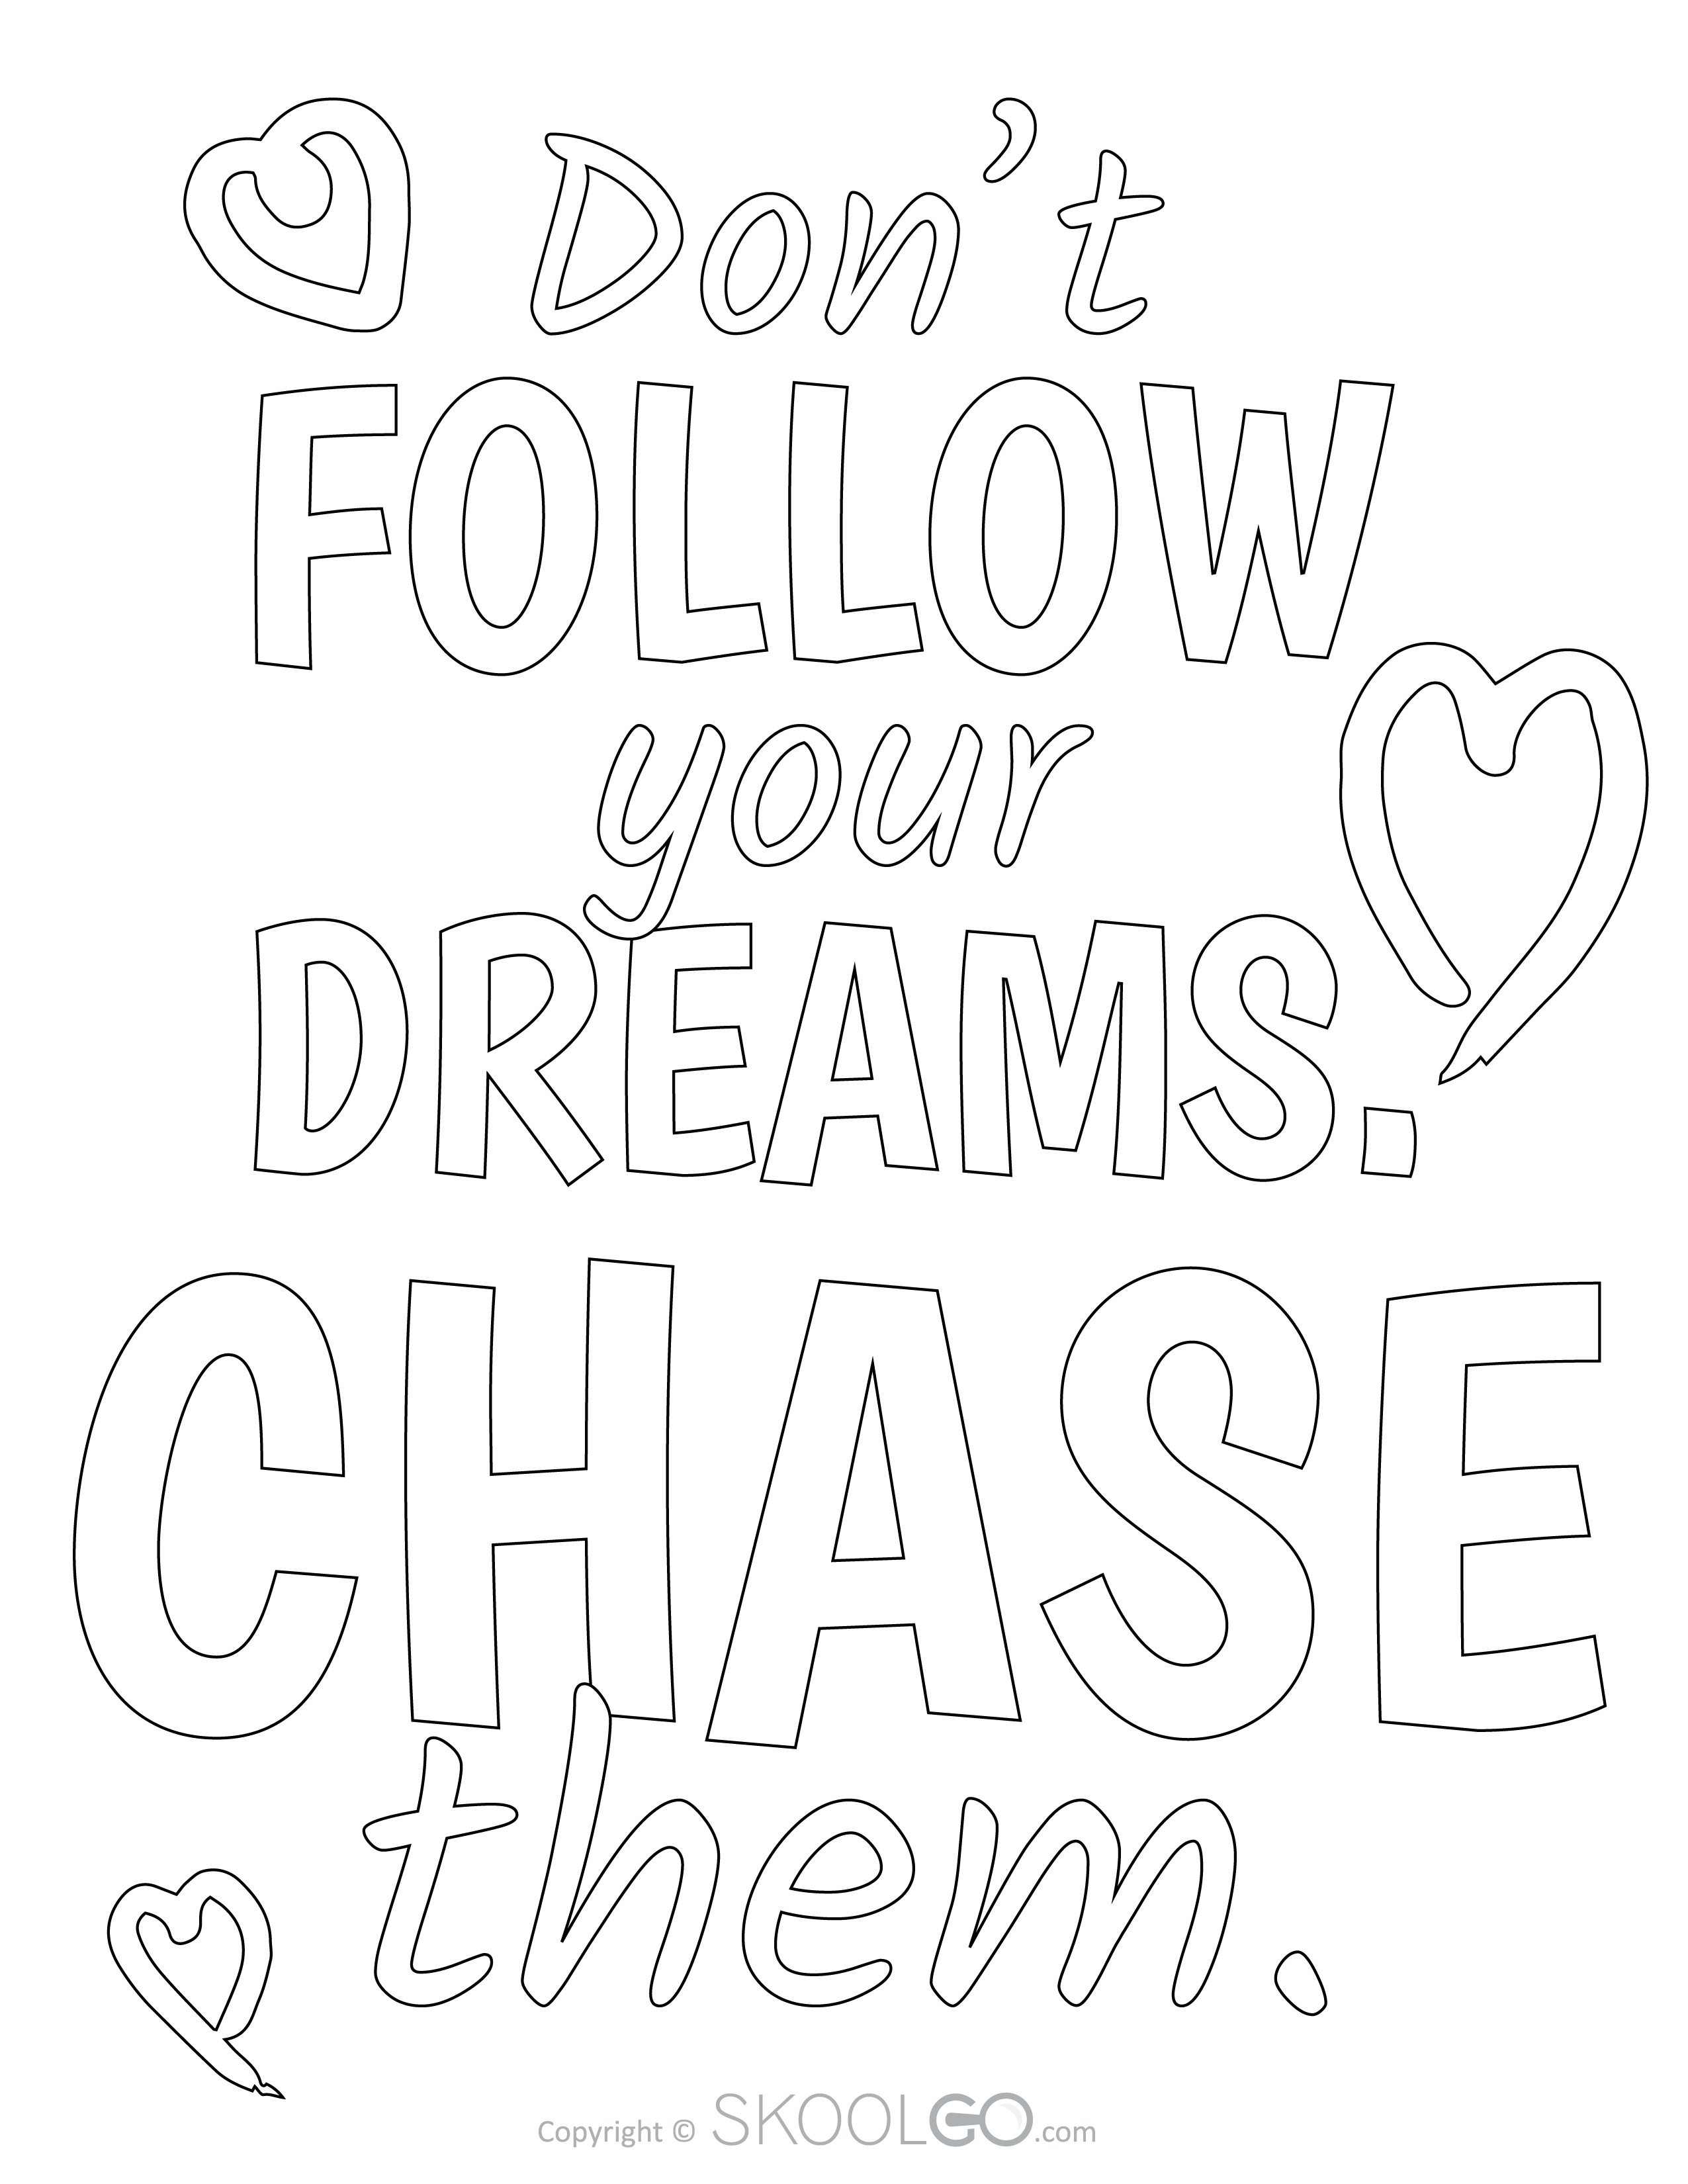 Do Not Follow Your Dreams Chase Them - Free Classroom Poster Coloring Version